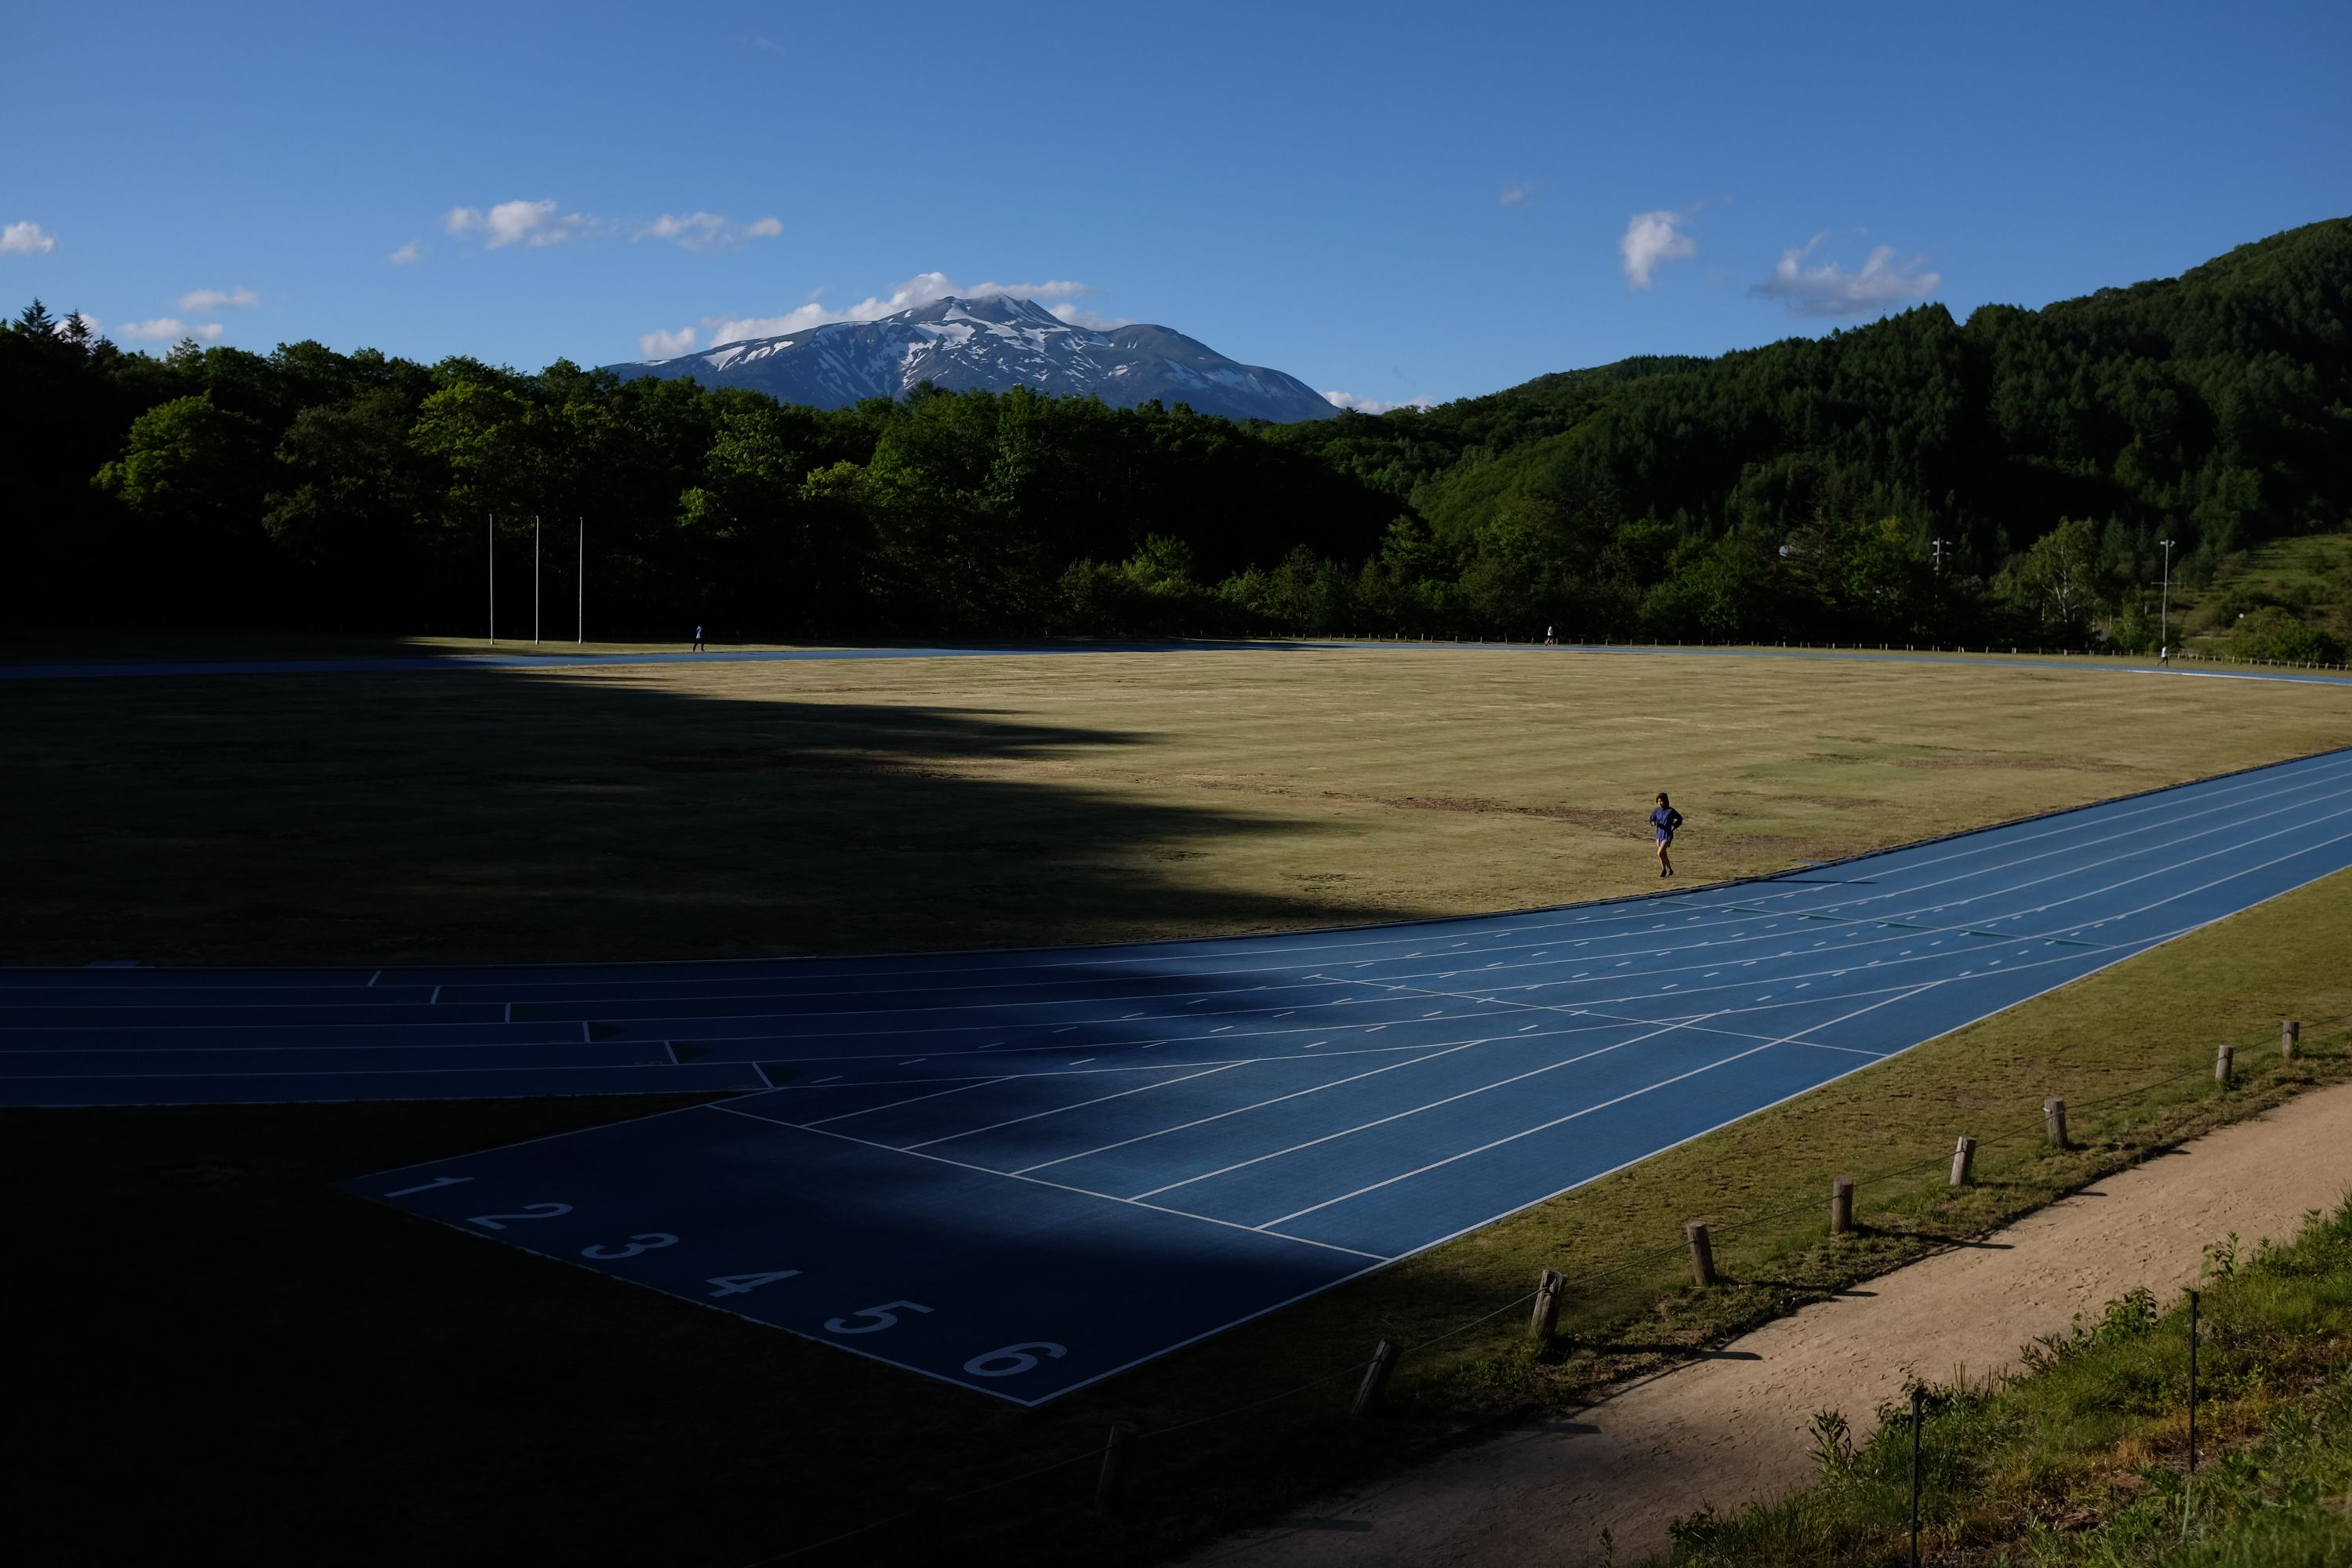 Running track in the late afternoon light, with Mount Norikura on the horizon.